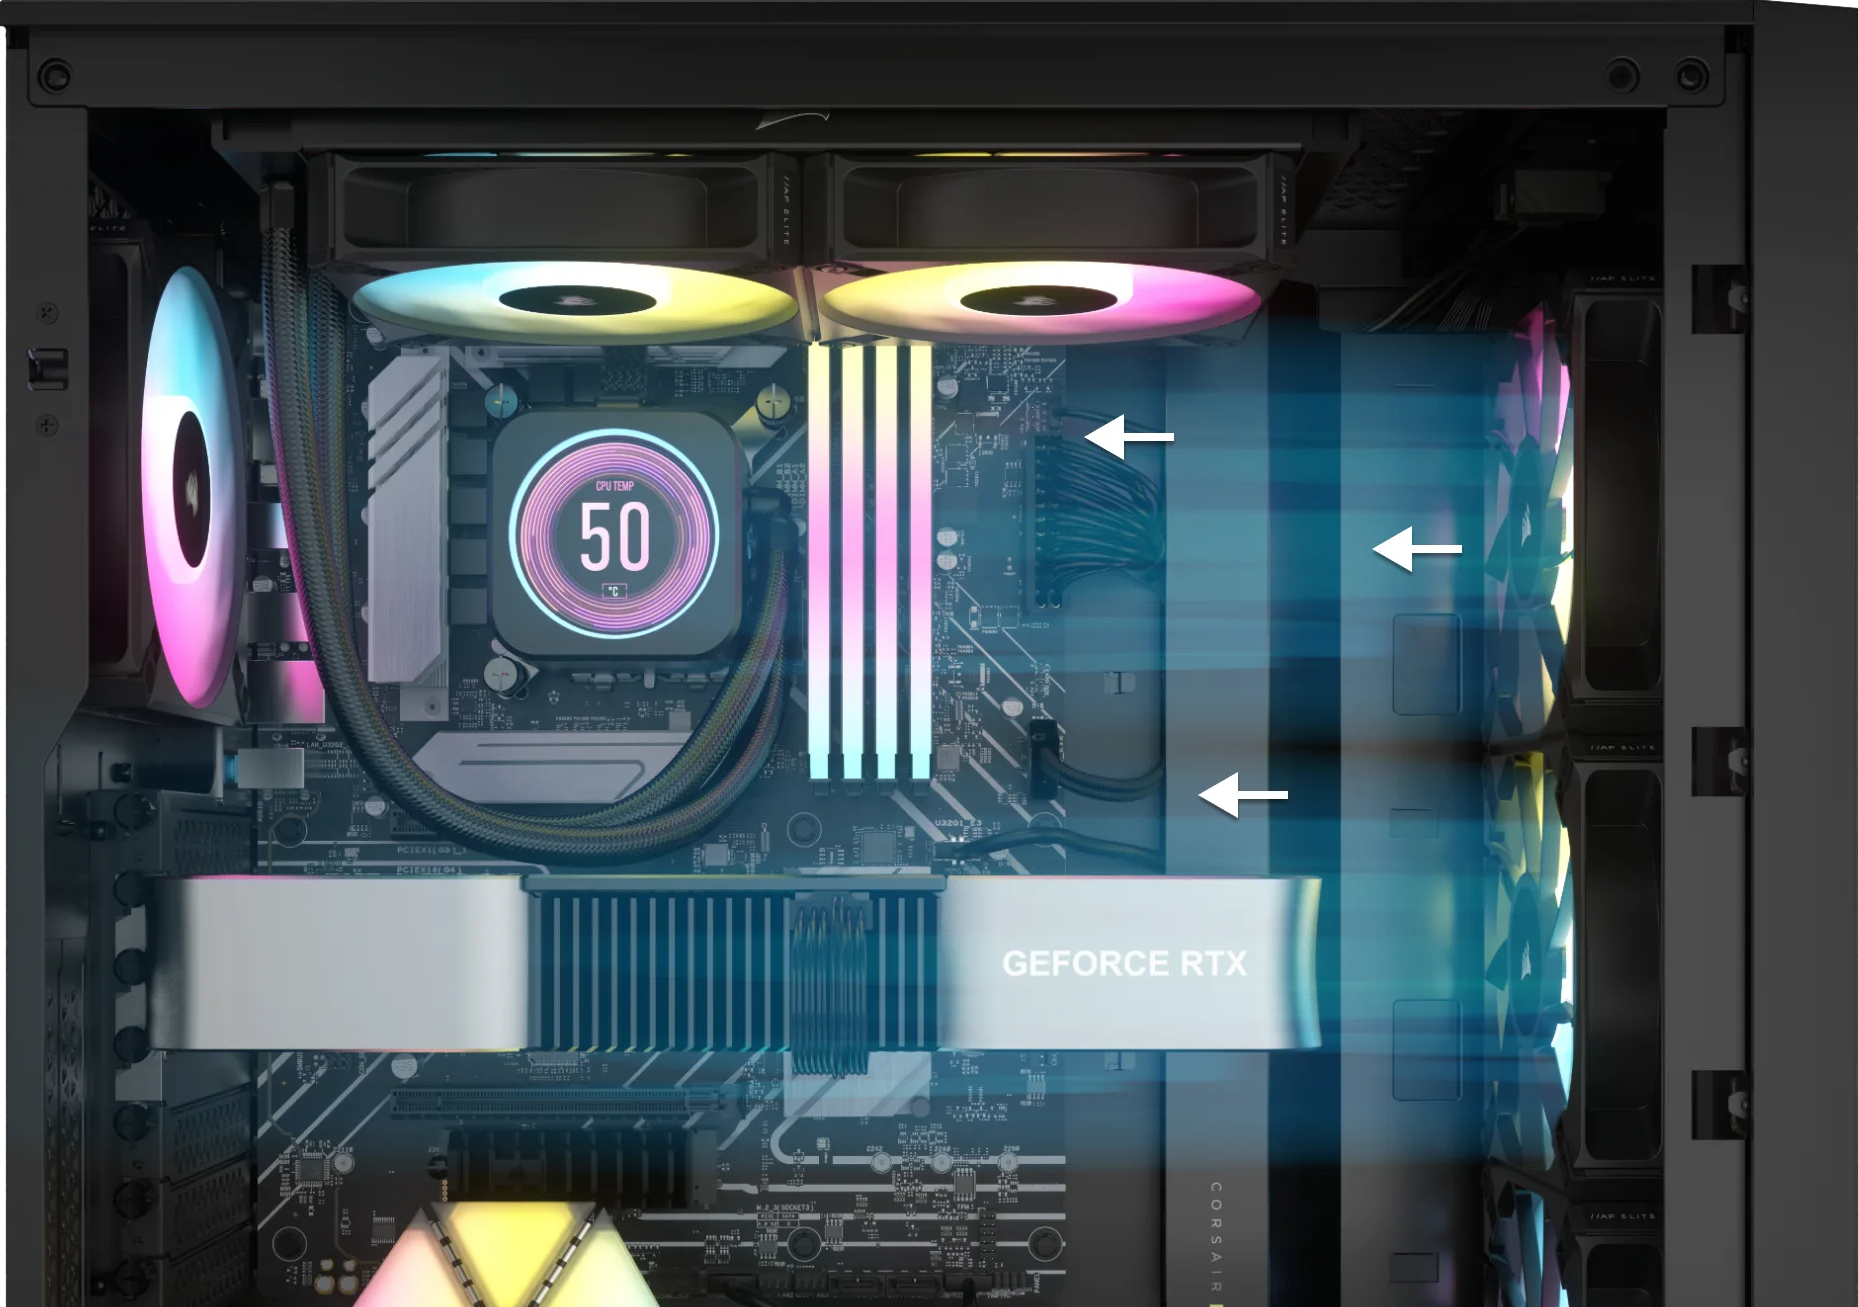 A view of 4000D RGB AIRFLOW with ventilated front panel.